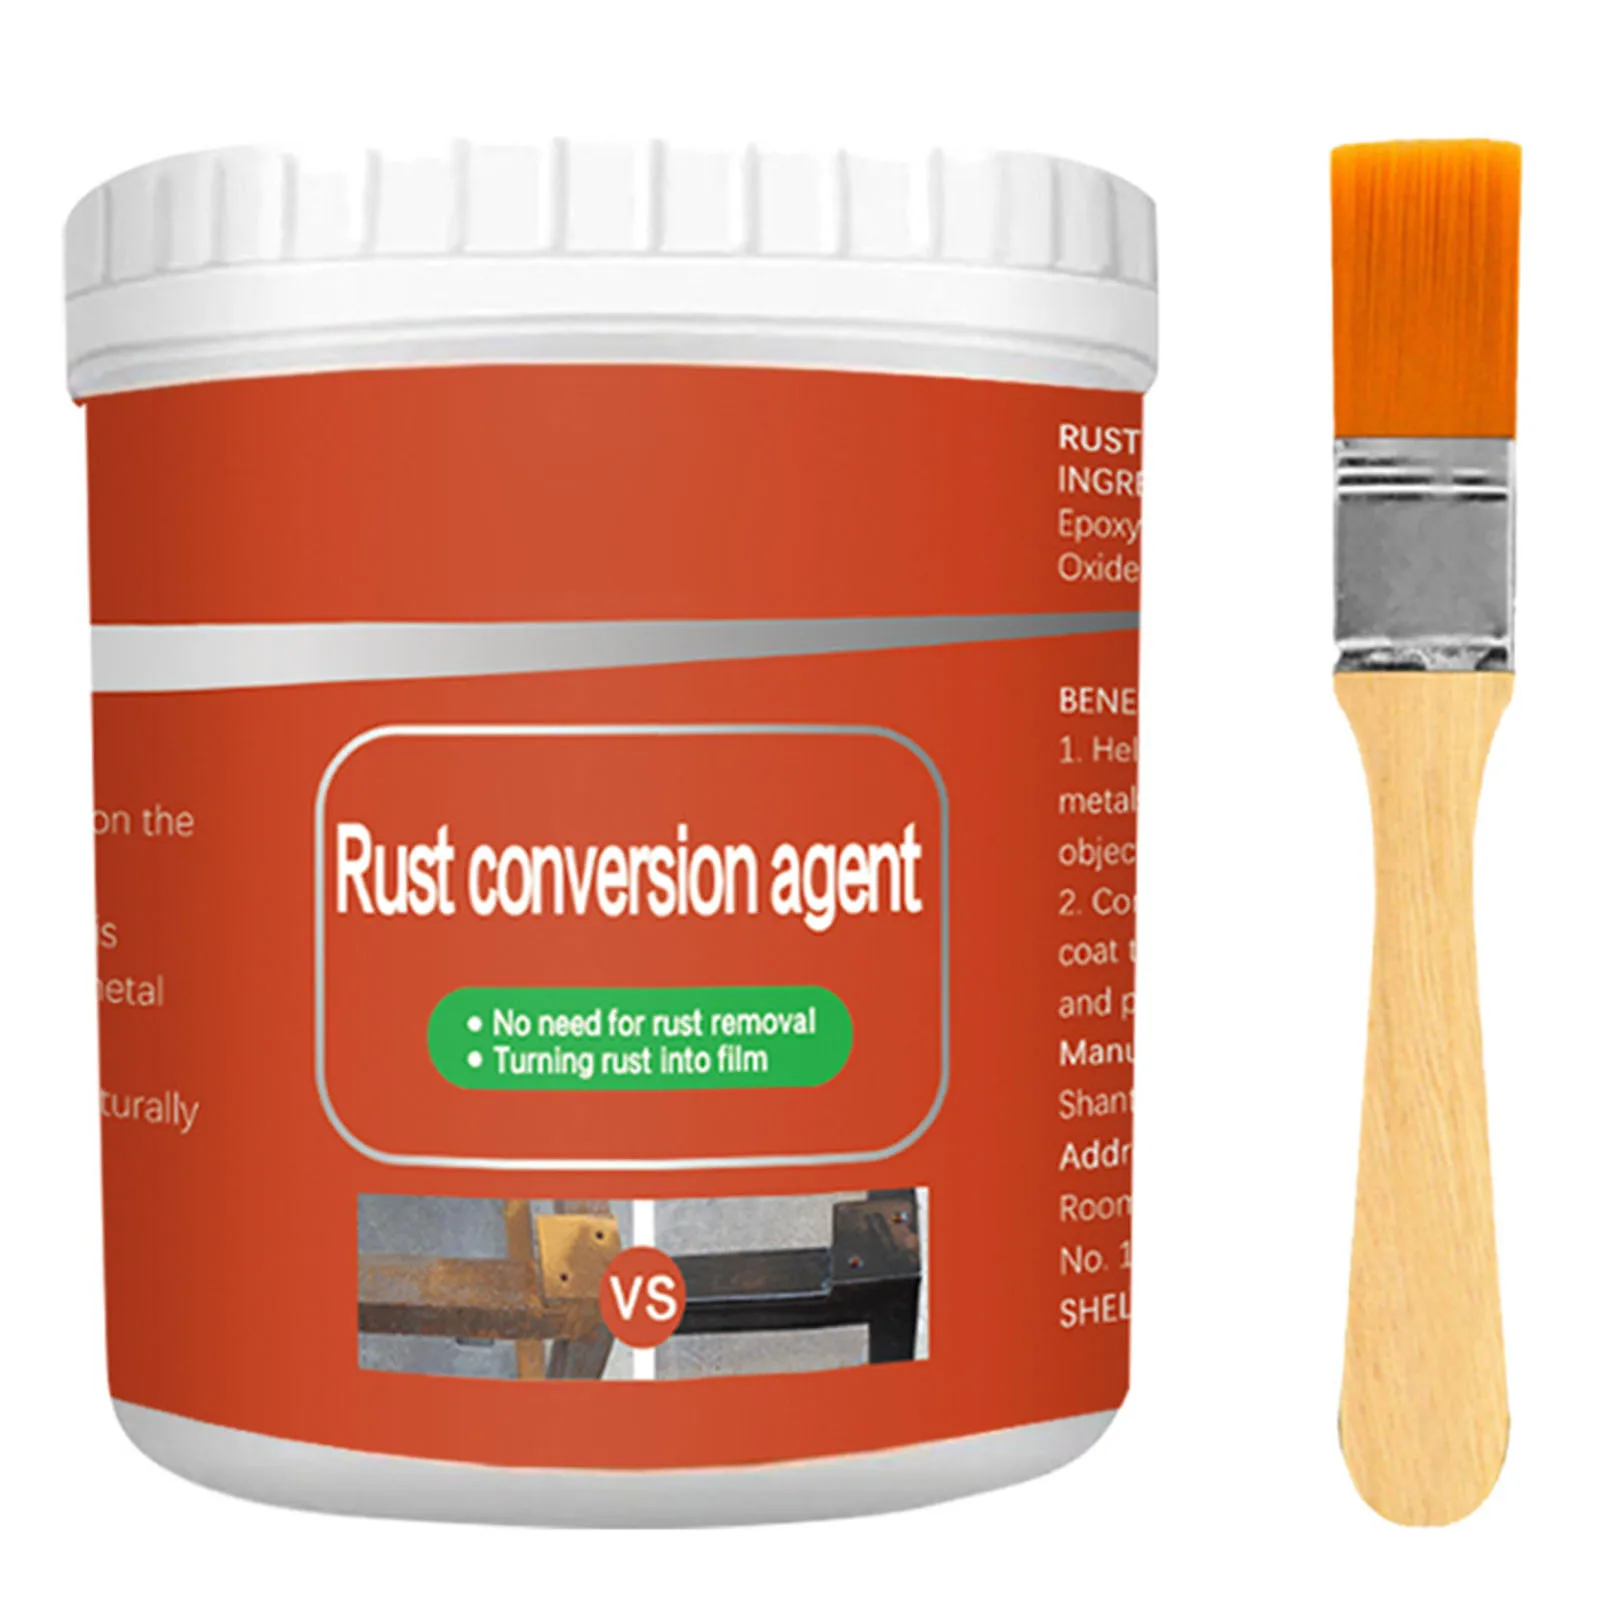 

100/300g Rust Conversion Agent Rust Inhibitor Derusting Paint Used For Fronts Lights Faucets